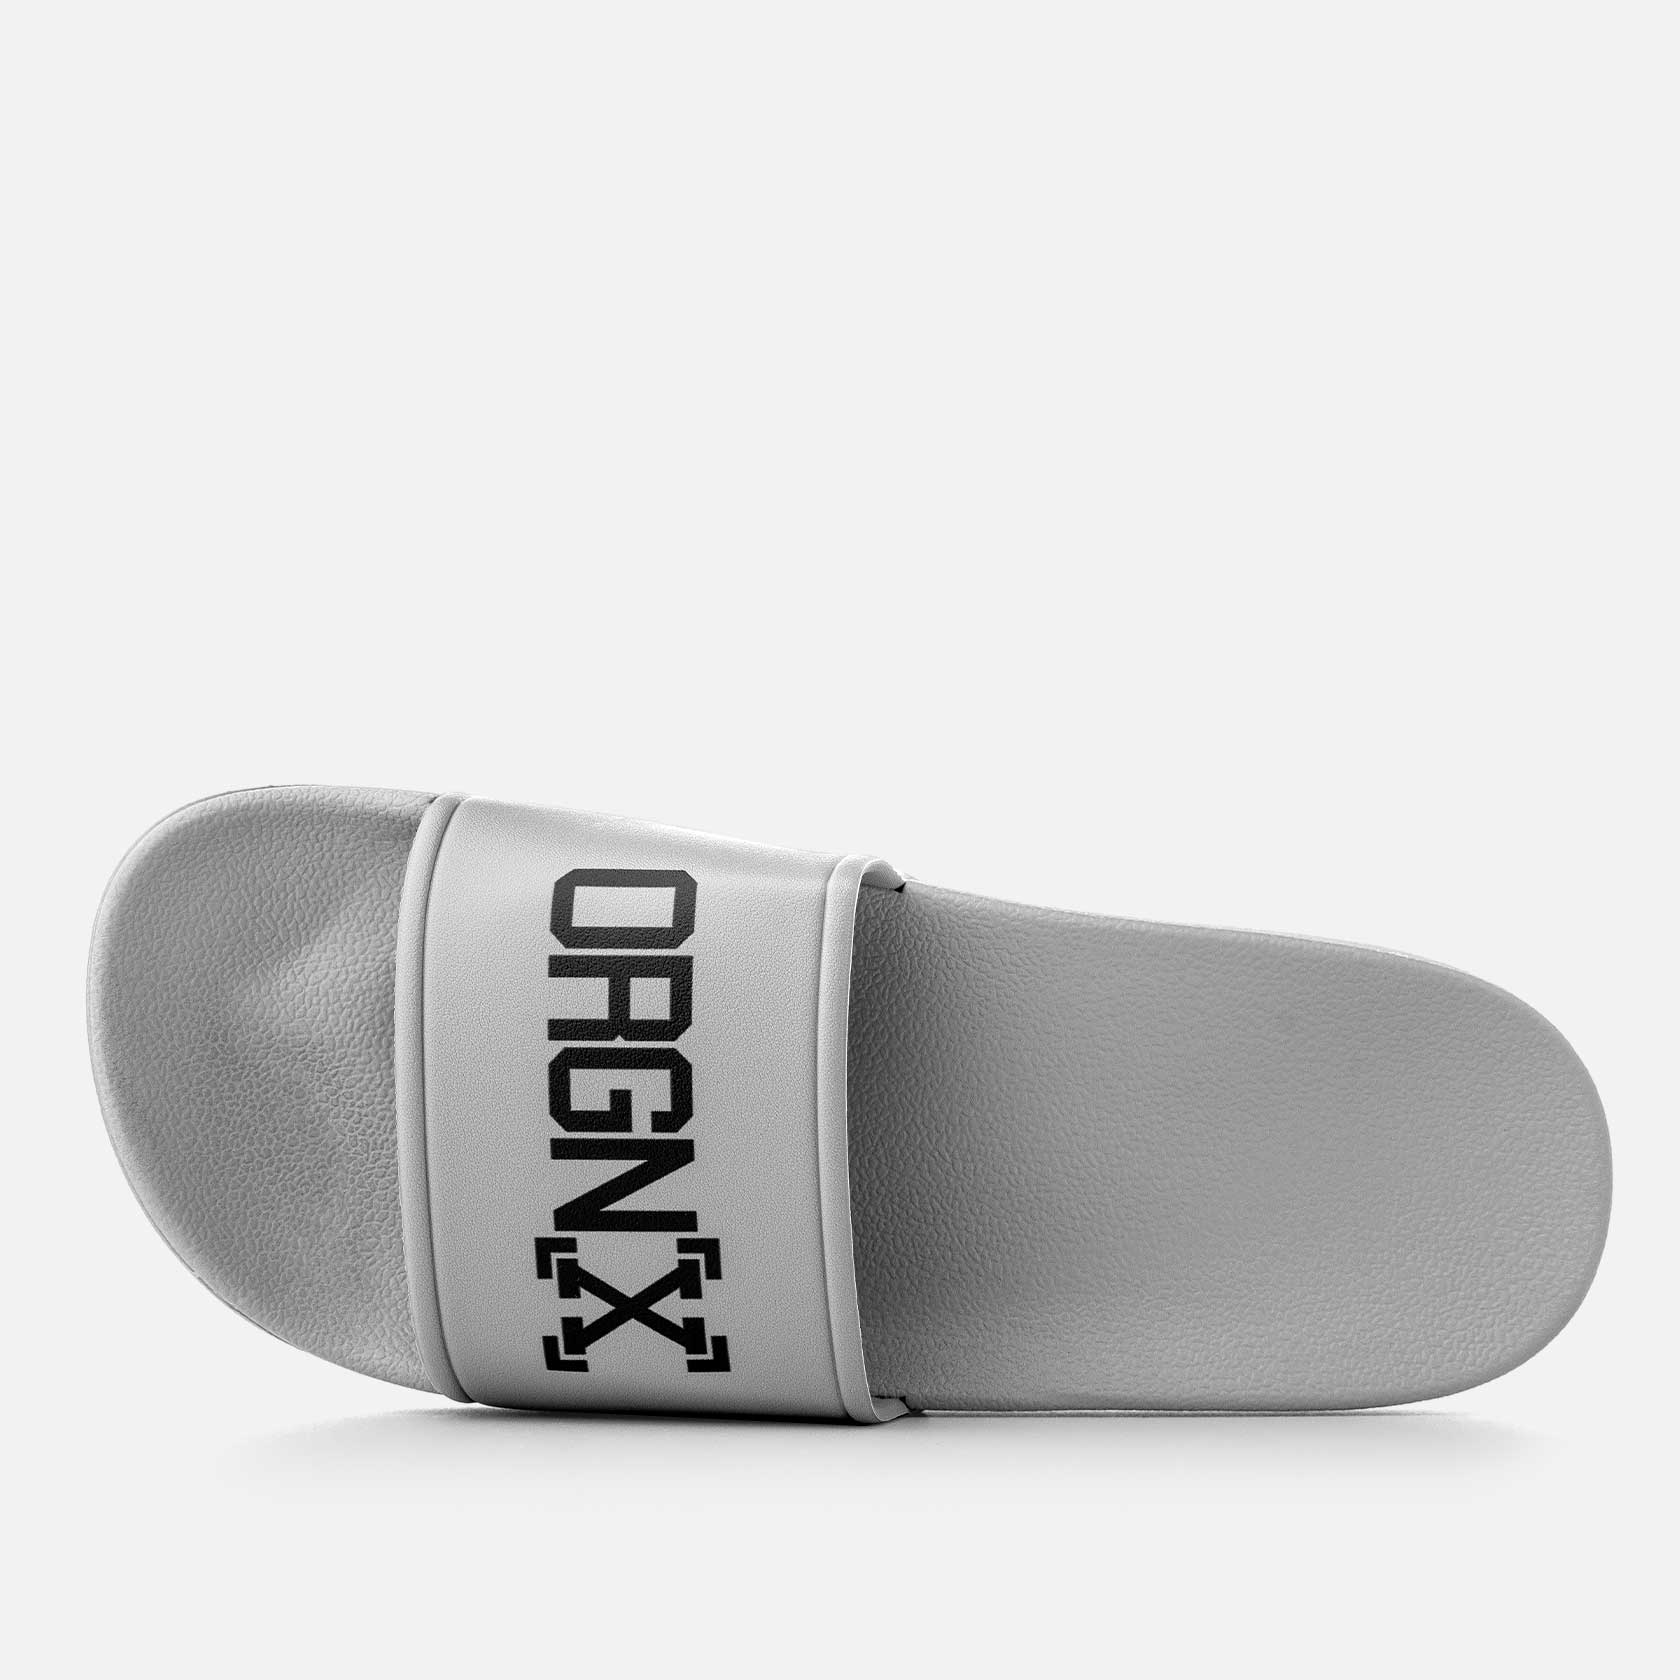 ORGNX Rubber Slides Gray Top